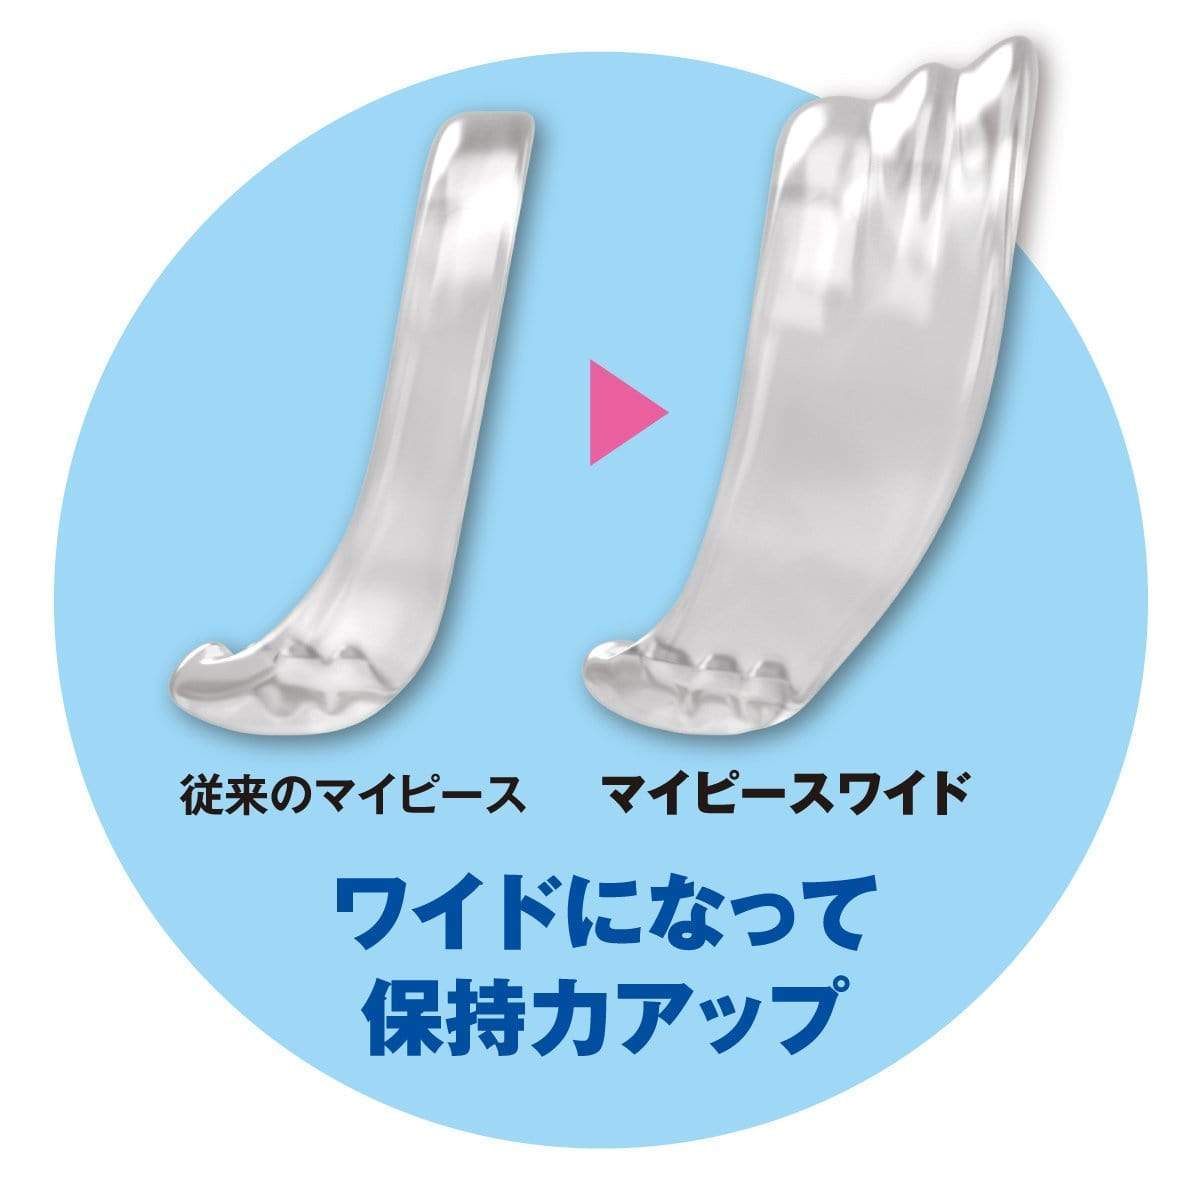 SSI Japan - My Peace Wide Soft Night Size S Correction Cock Ring (Clear) -  Cock Ring (Non Vibration)  Durio.sg